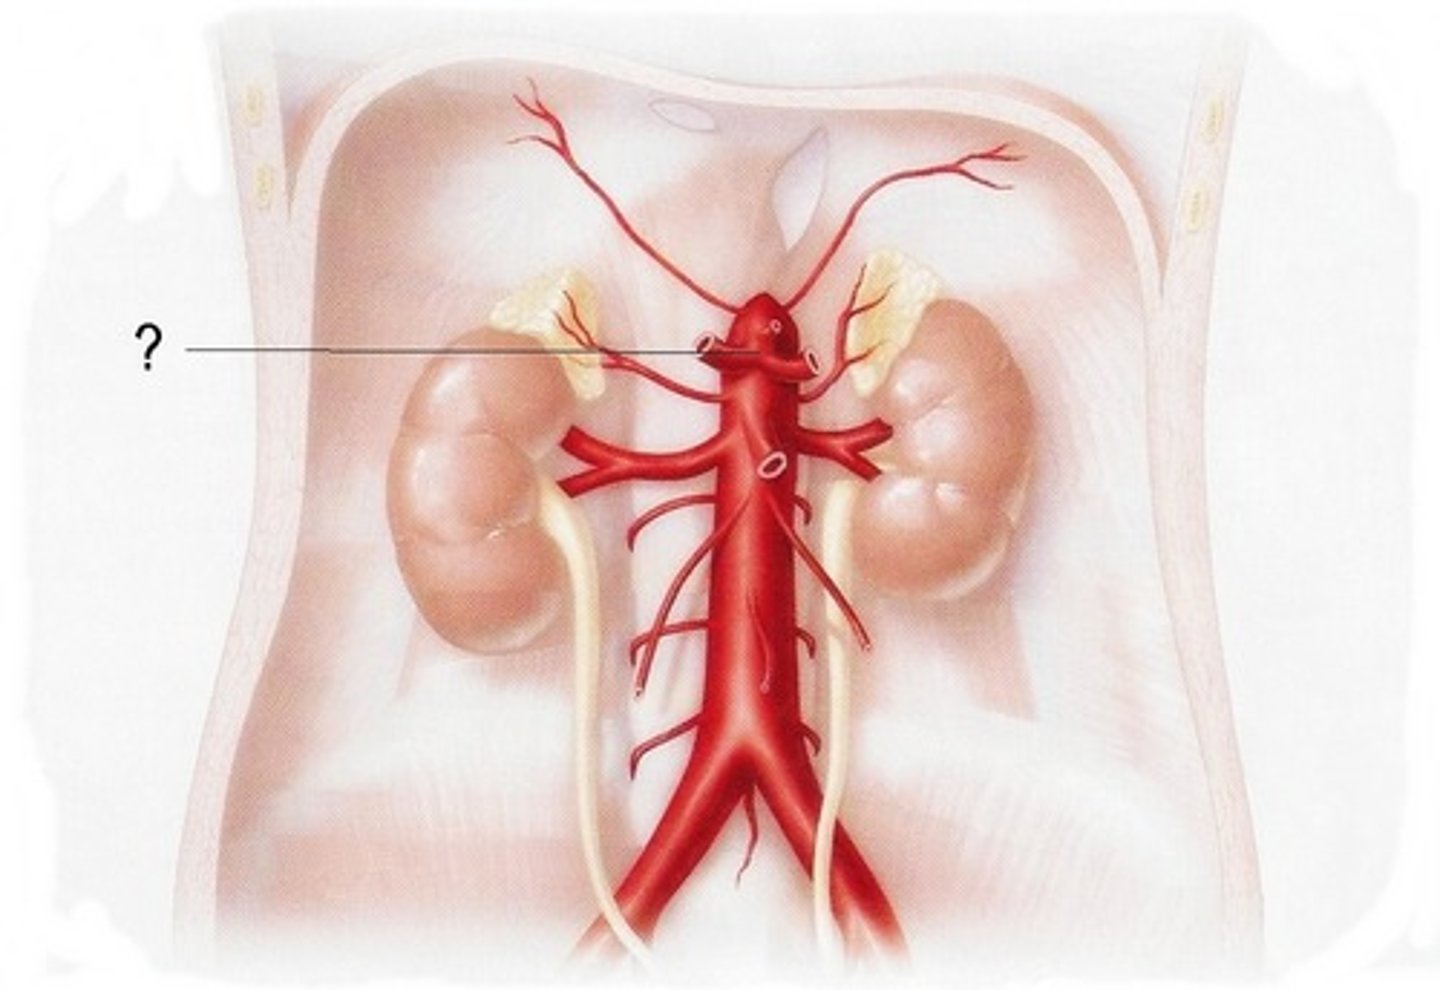 <p>Large unpaired branch of the abdominal aorta that supplies the liver, stomach, and spleen.</p>